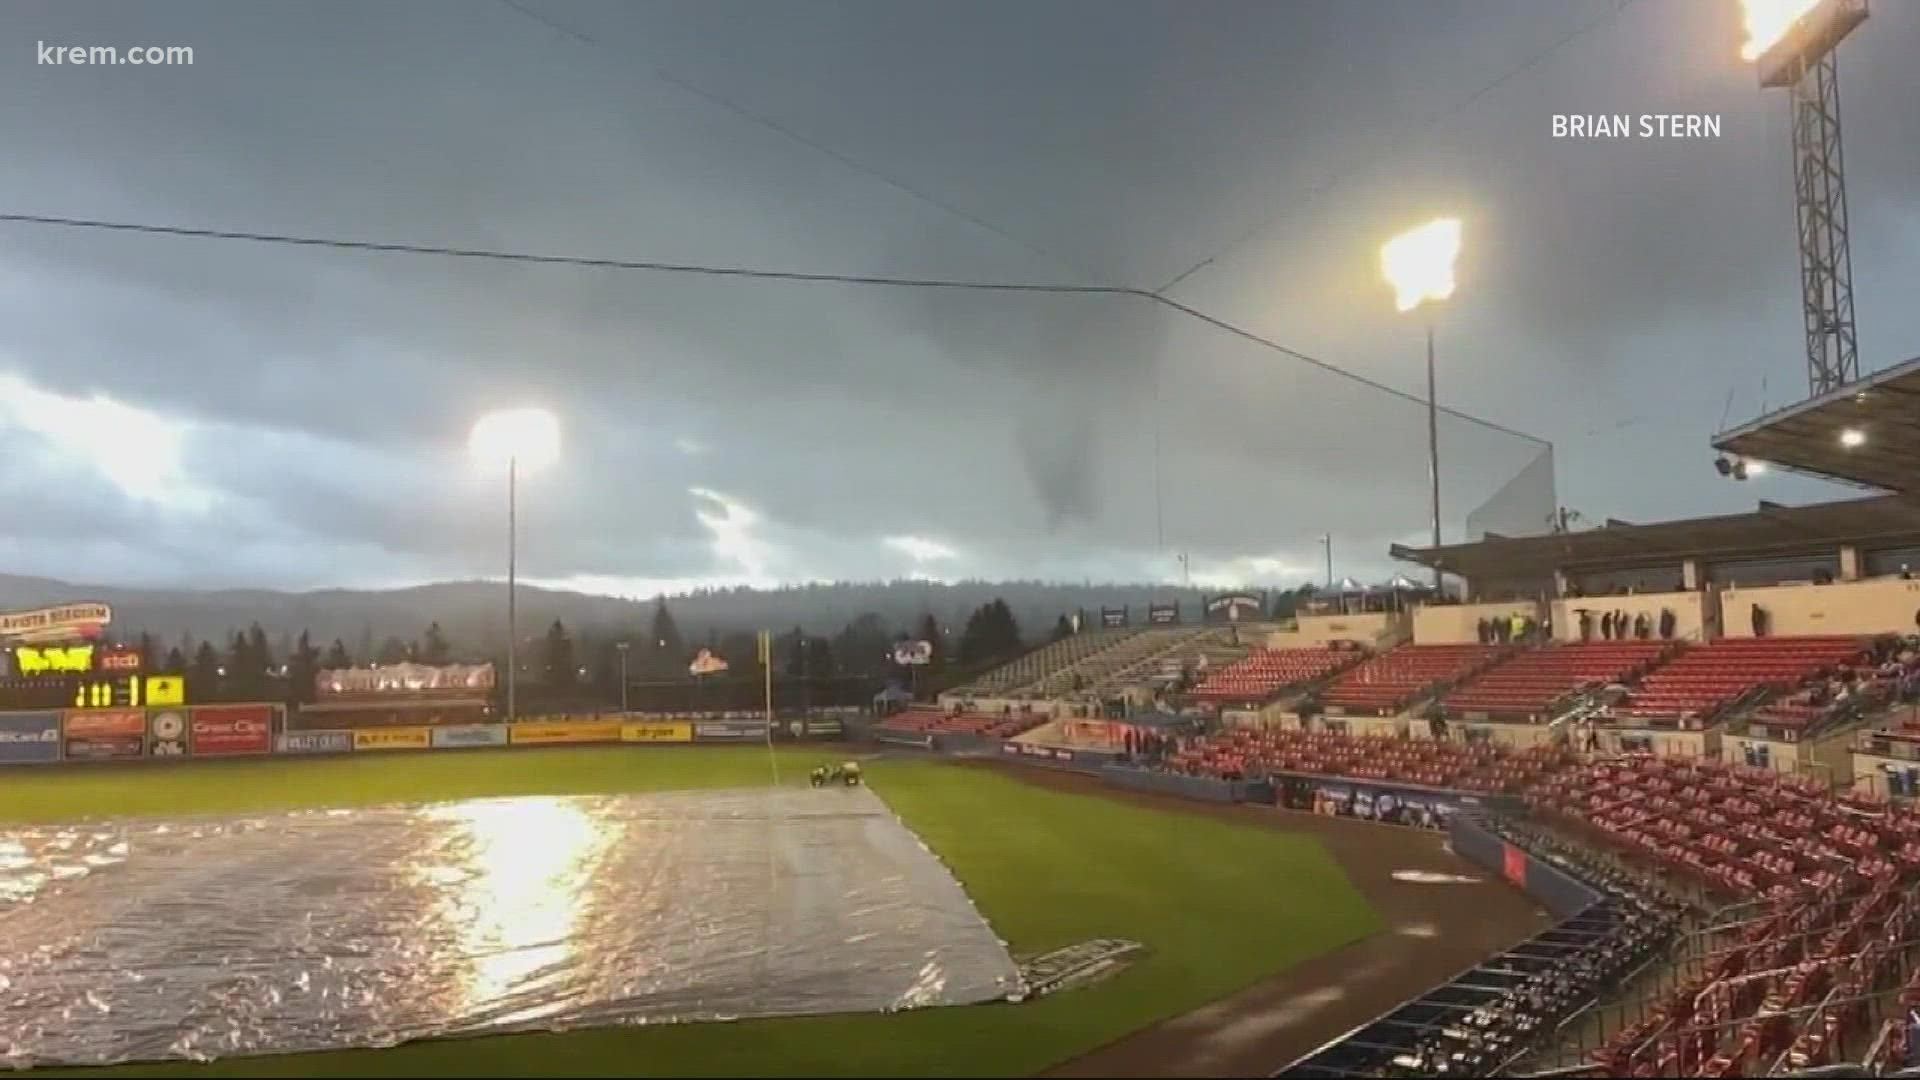 A strong storm cell that moved through the Spokane area Friday night brought heavy rain, winds, thunder and lightning, and a confirmed two tornadoes.